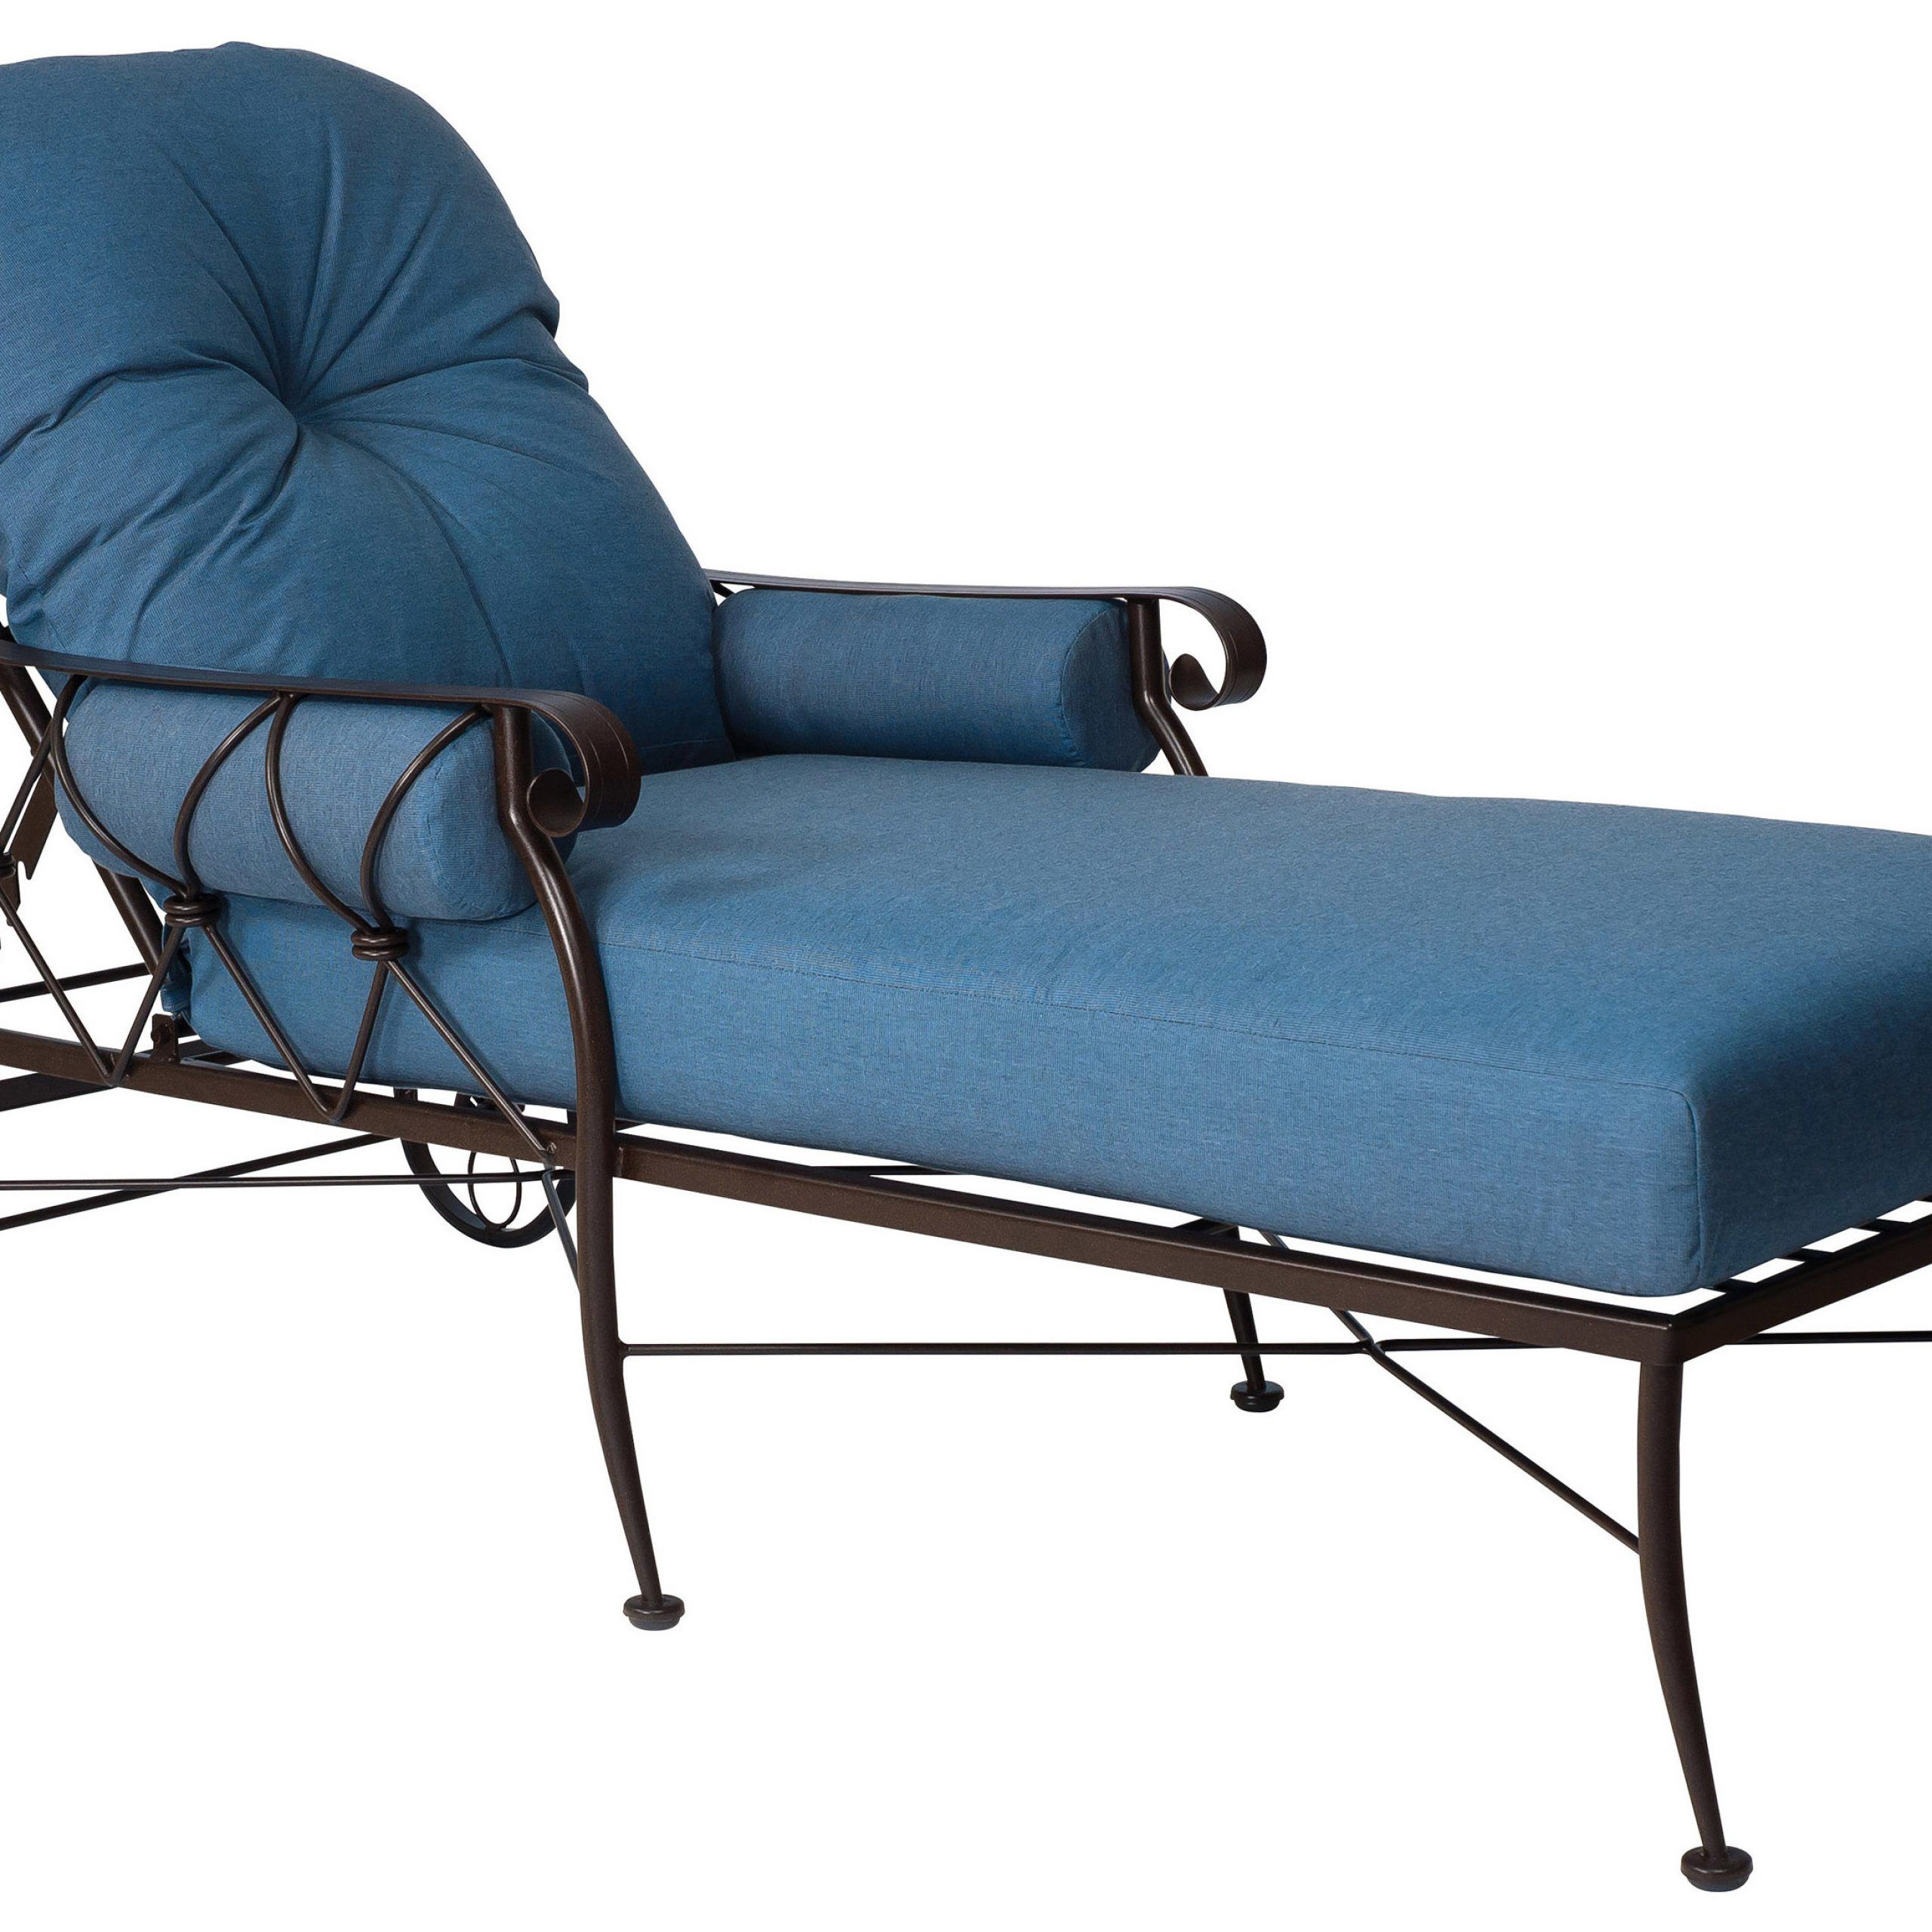 Wrought Iron Outdoor Chaise Lounge Chairs : Woodard Bradford Adjustable Intended For Steel Arm Outdoor Aluminum Chaise Sets (View 2 of 15)